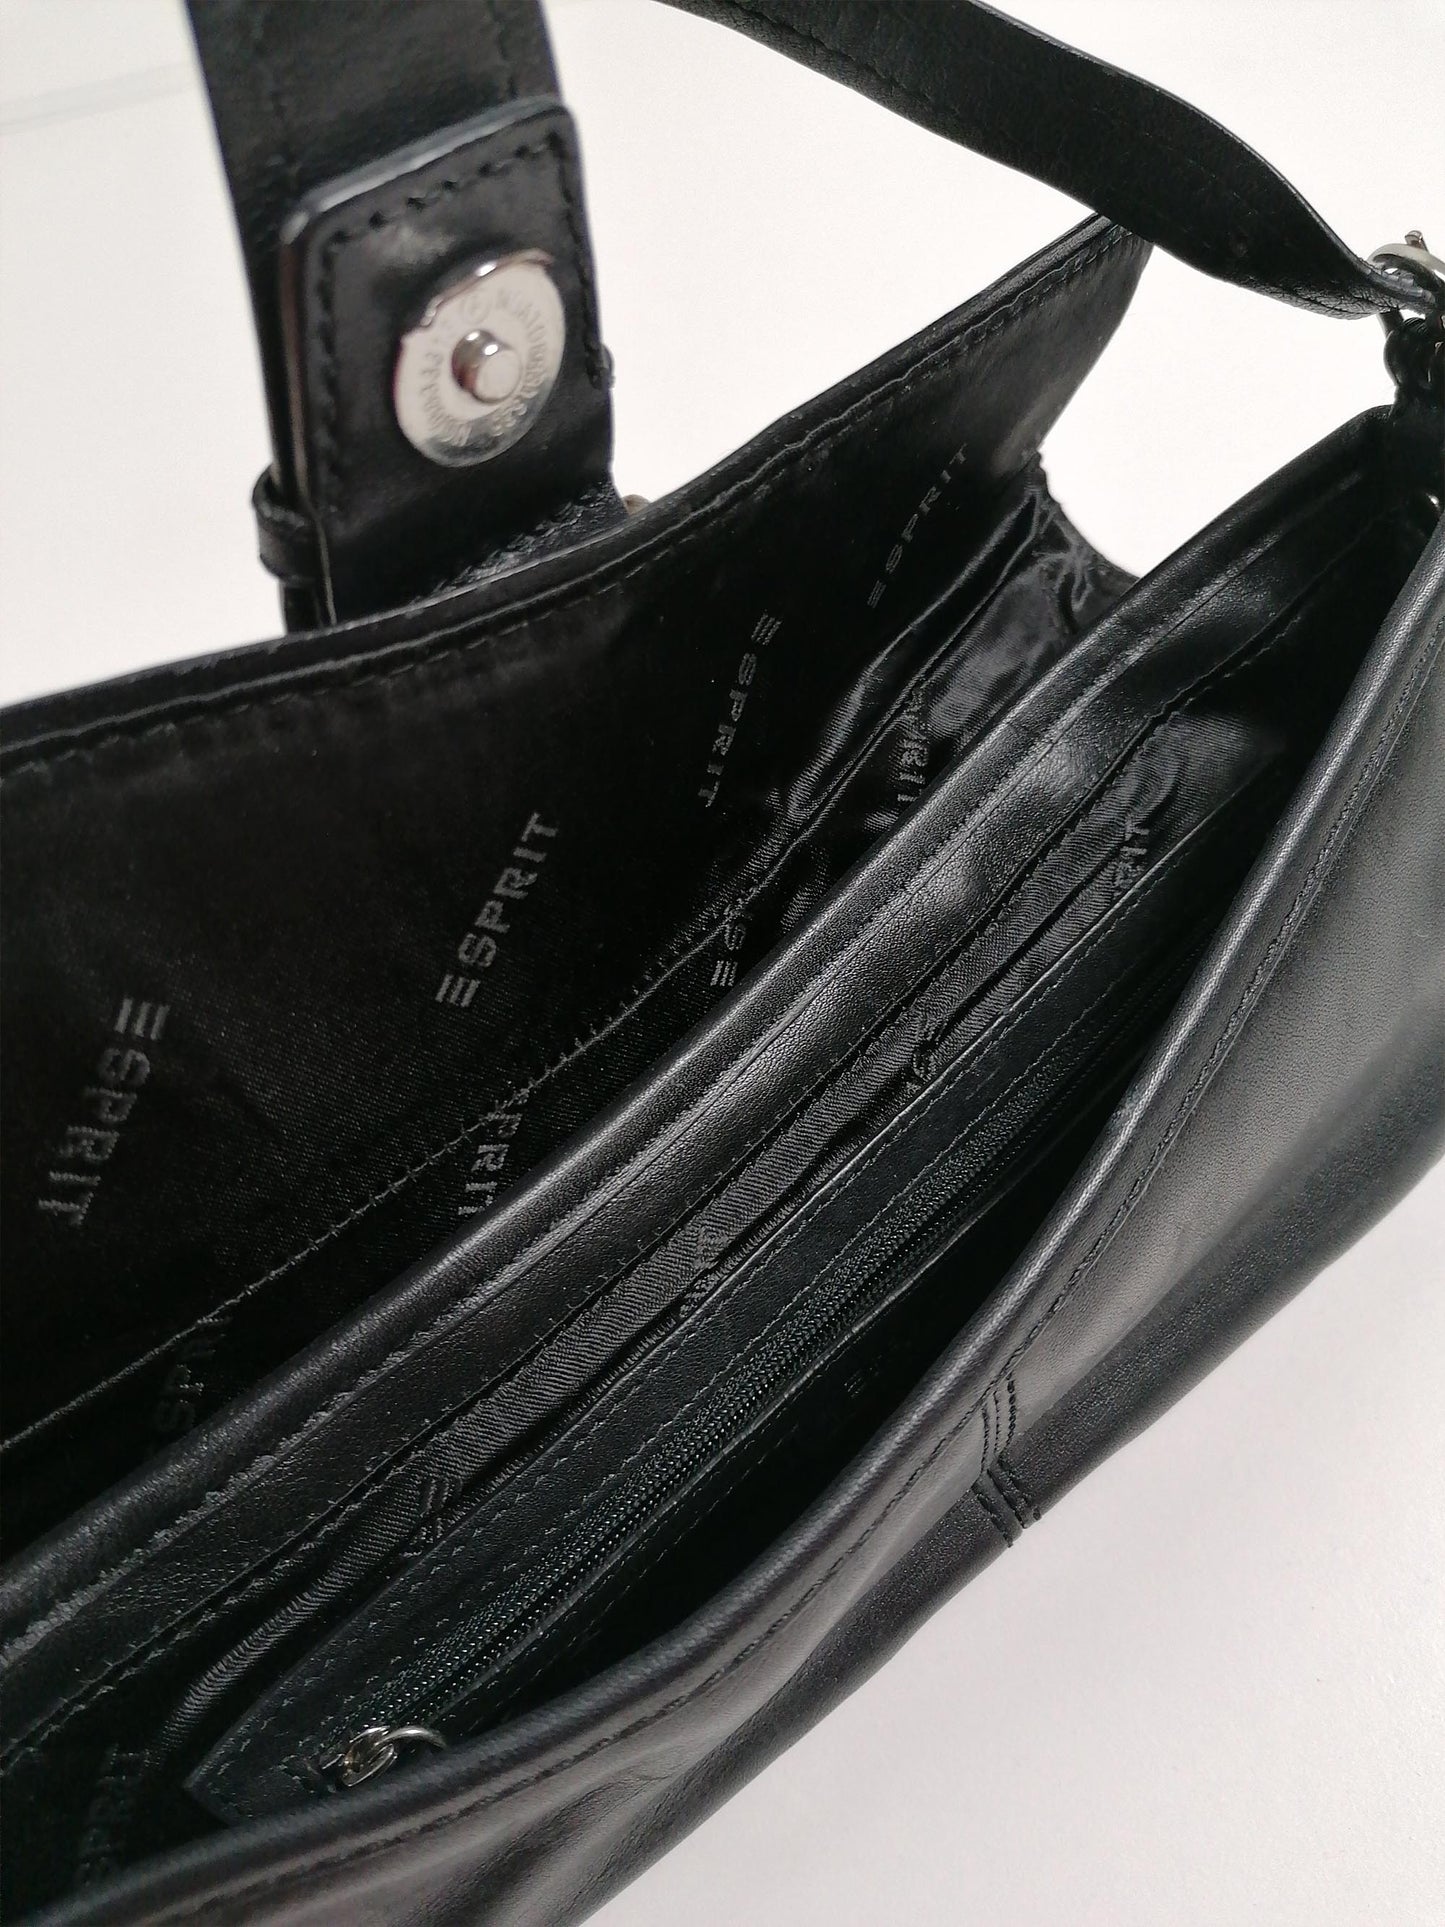 ESPRIT 90's Y2K Small Bag Real Leather Black